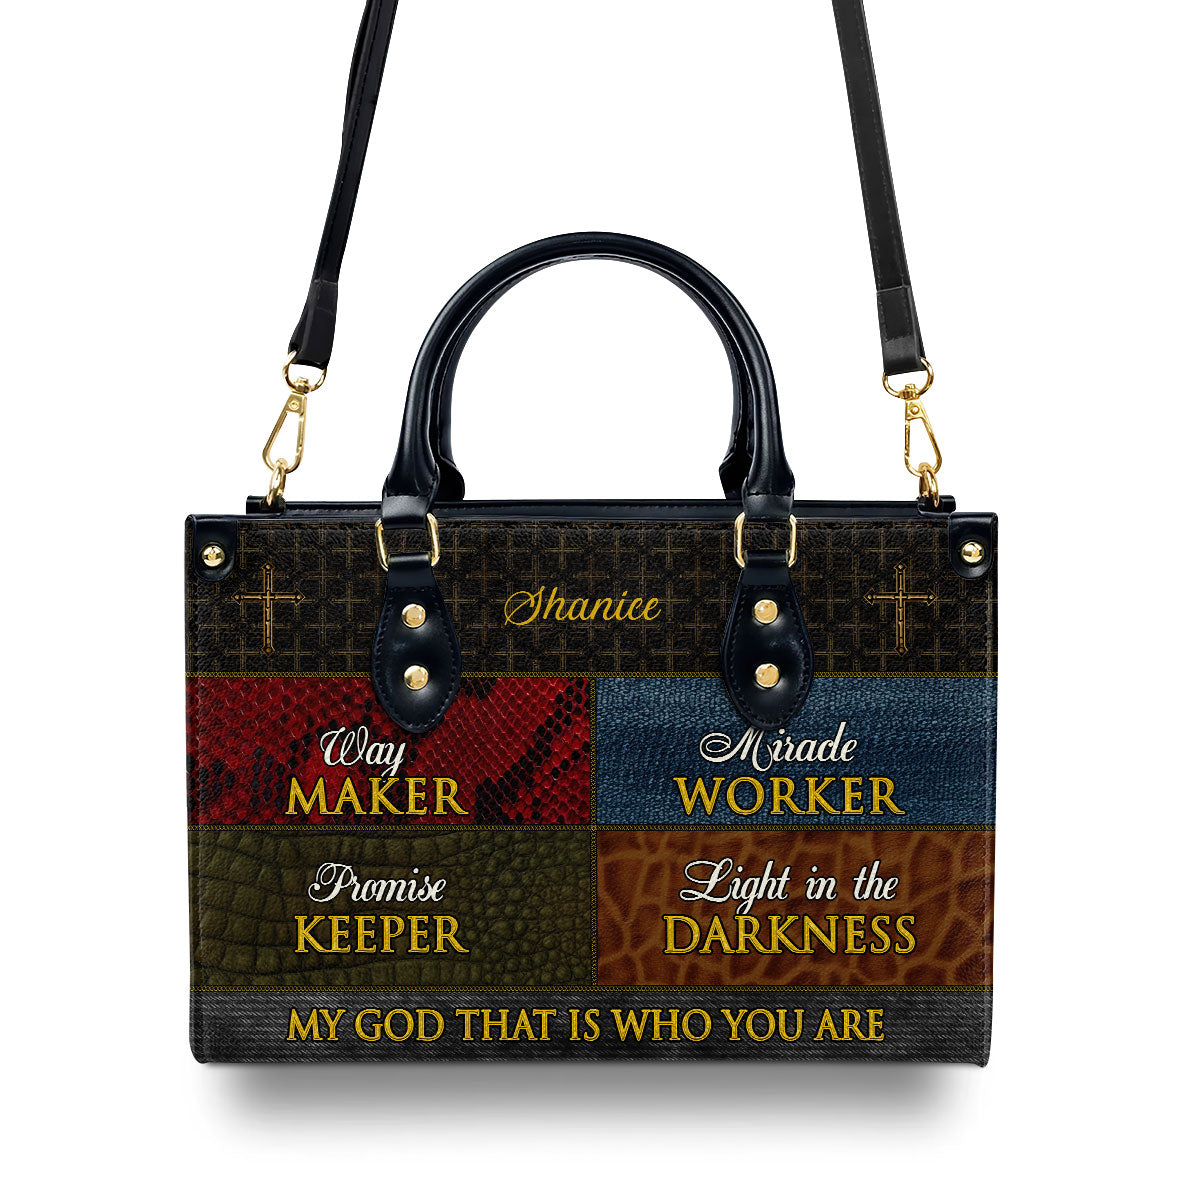 way maker miracle worker promise keeper  Personalized Leather Handbag With Zipper - Inspirational Gift Christian Ladies